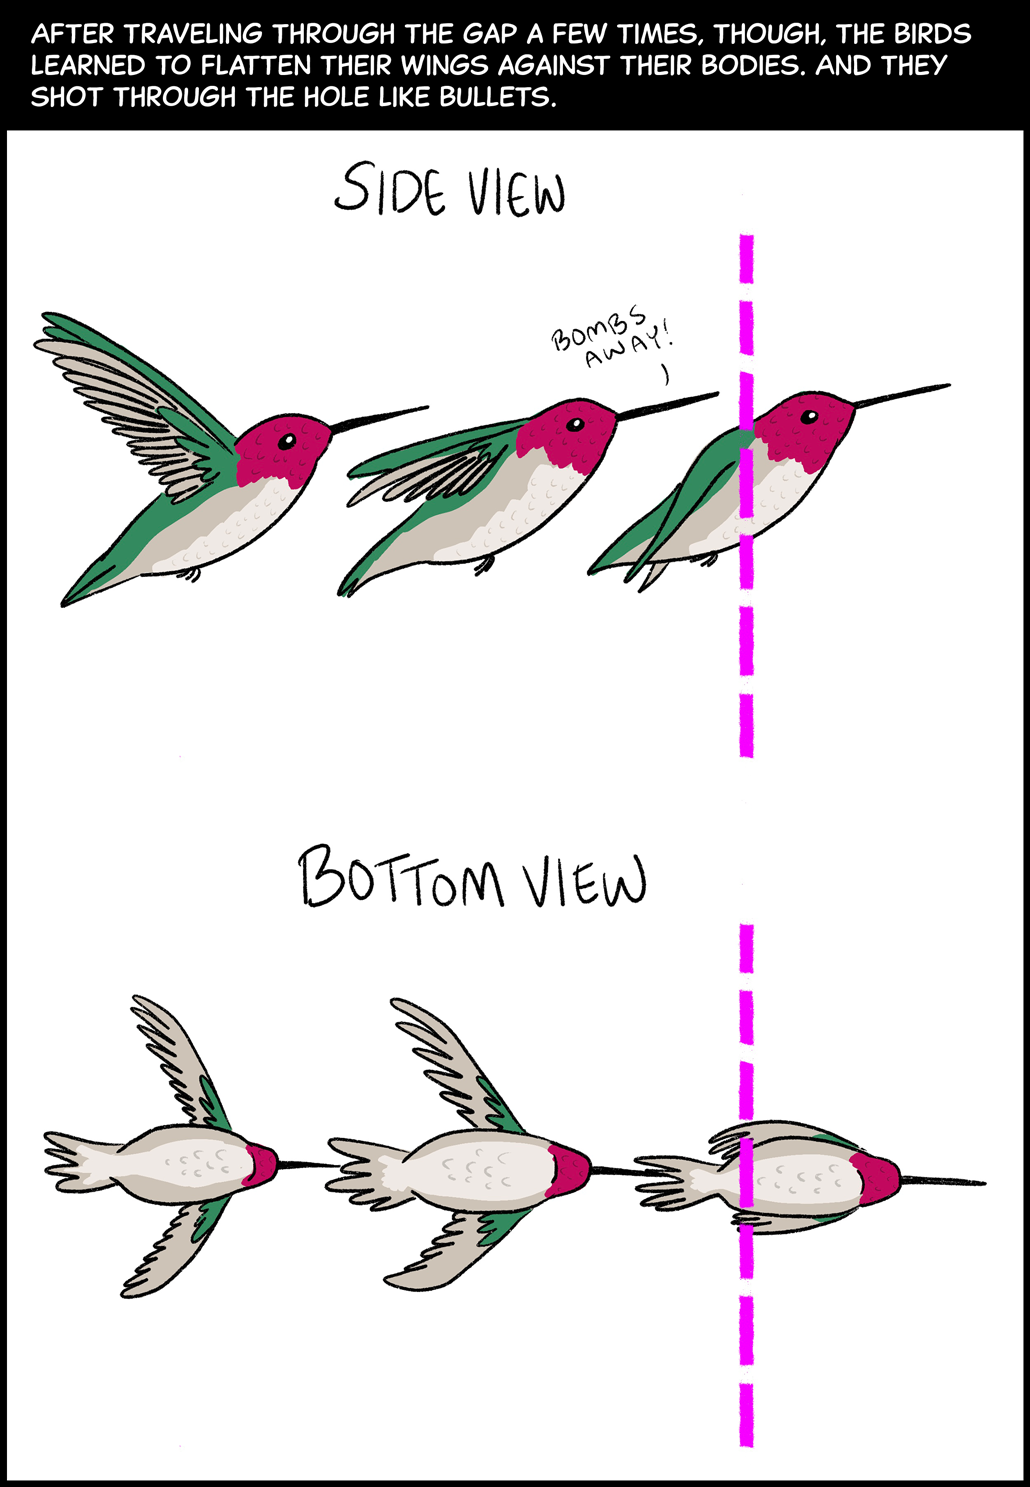 After traveling through the gap a few times, though, the birds learned to flatten their wings against their bodies. And they shot through the hole like bullets. Image (top): A side view of the hummingbird shows how it pins its wings to its body to zip through a gap, saying “Bombs away!” as it goes. Image (bottom): A bottom view of the same hummingbird shows how its wings lay flat against its body as it pulls this maneuver. 